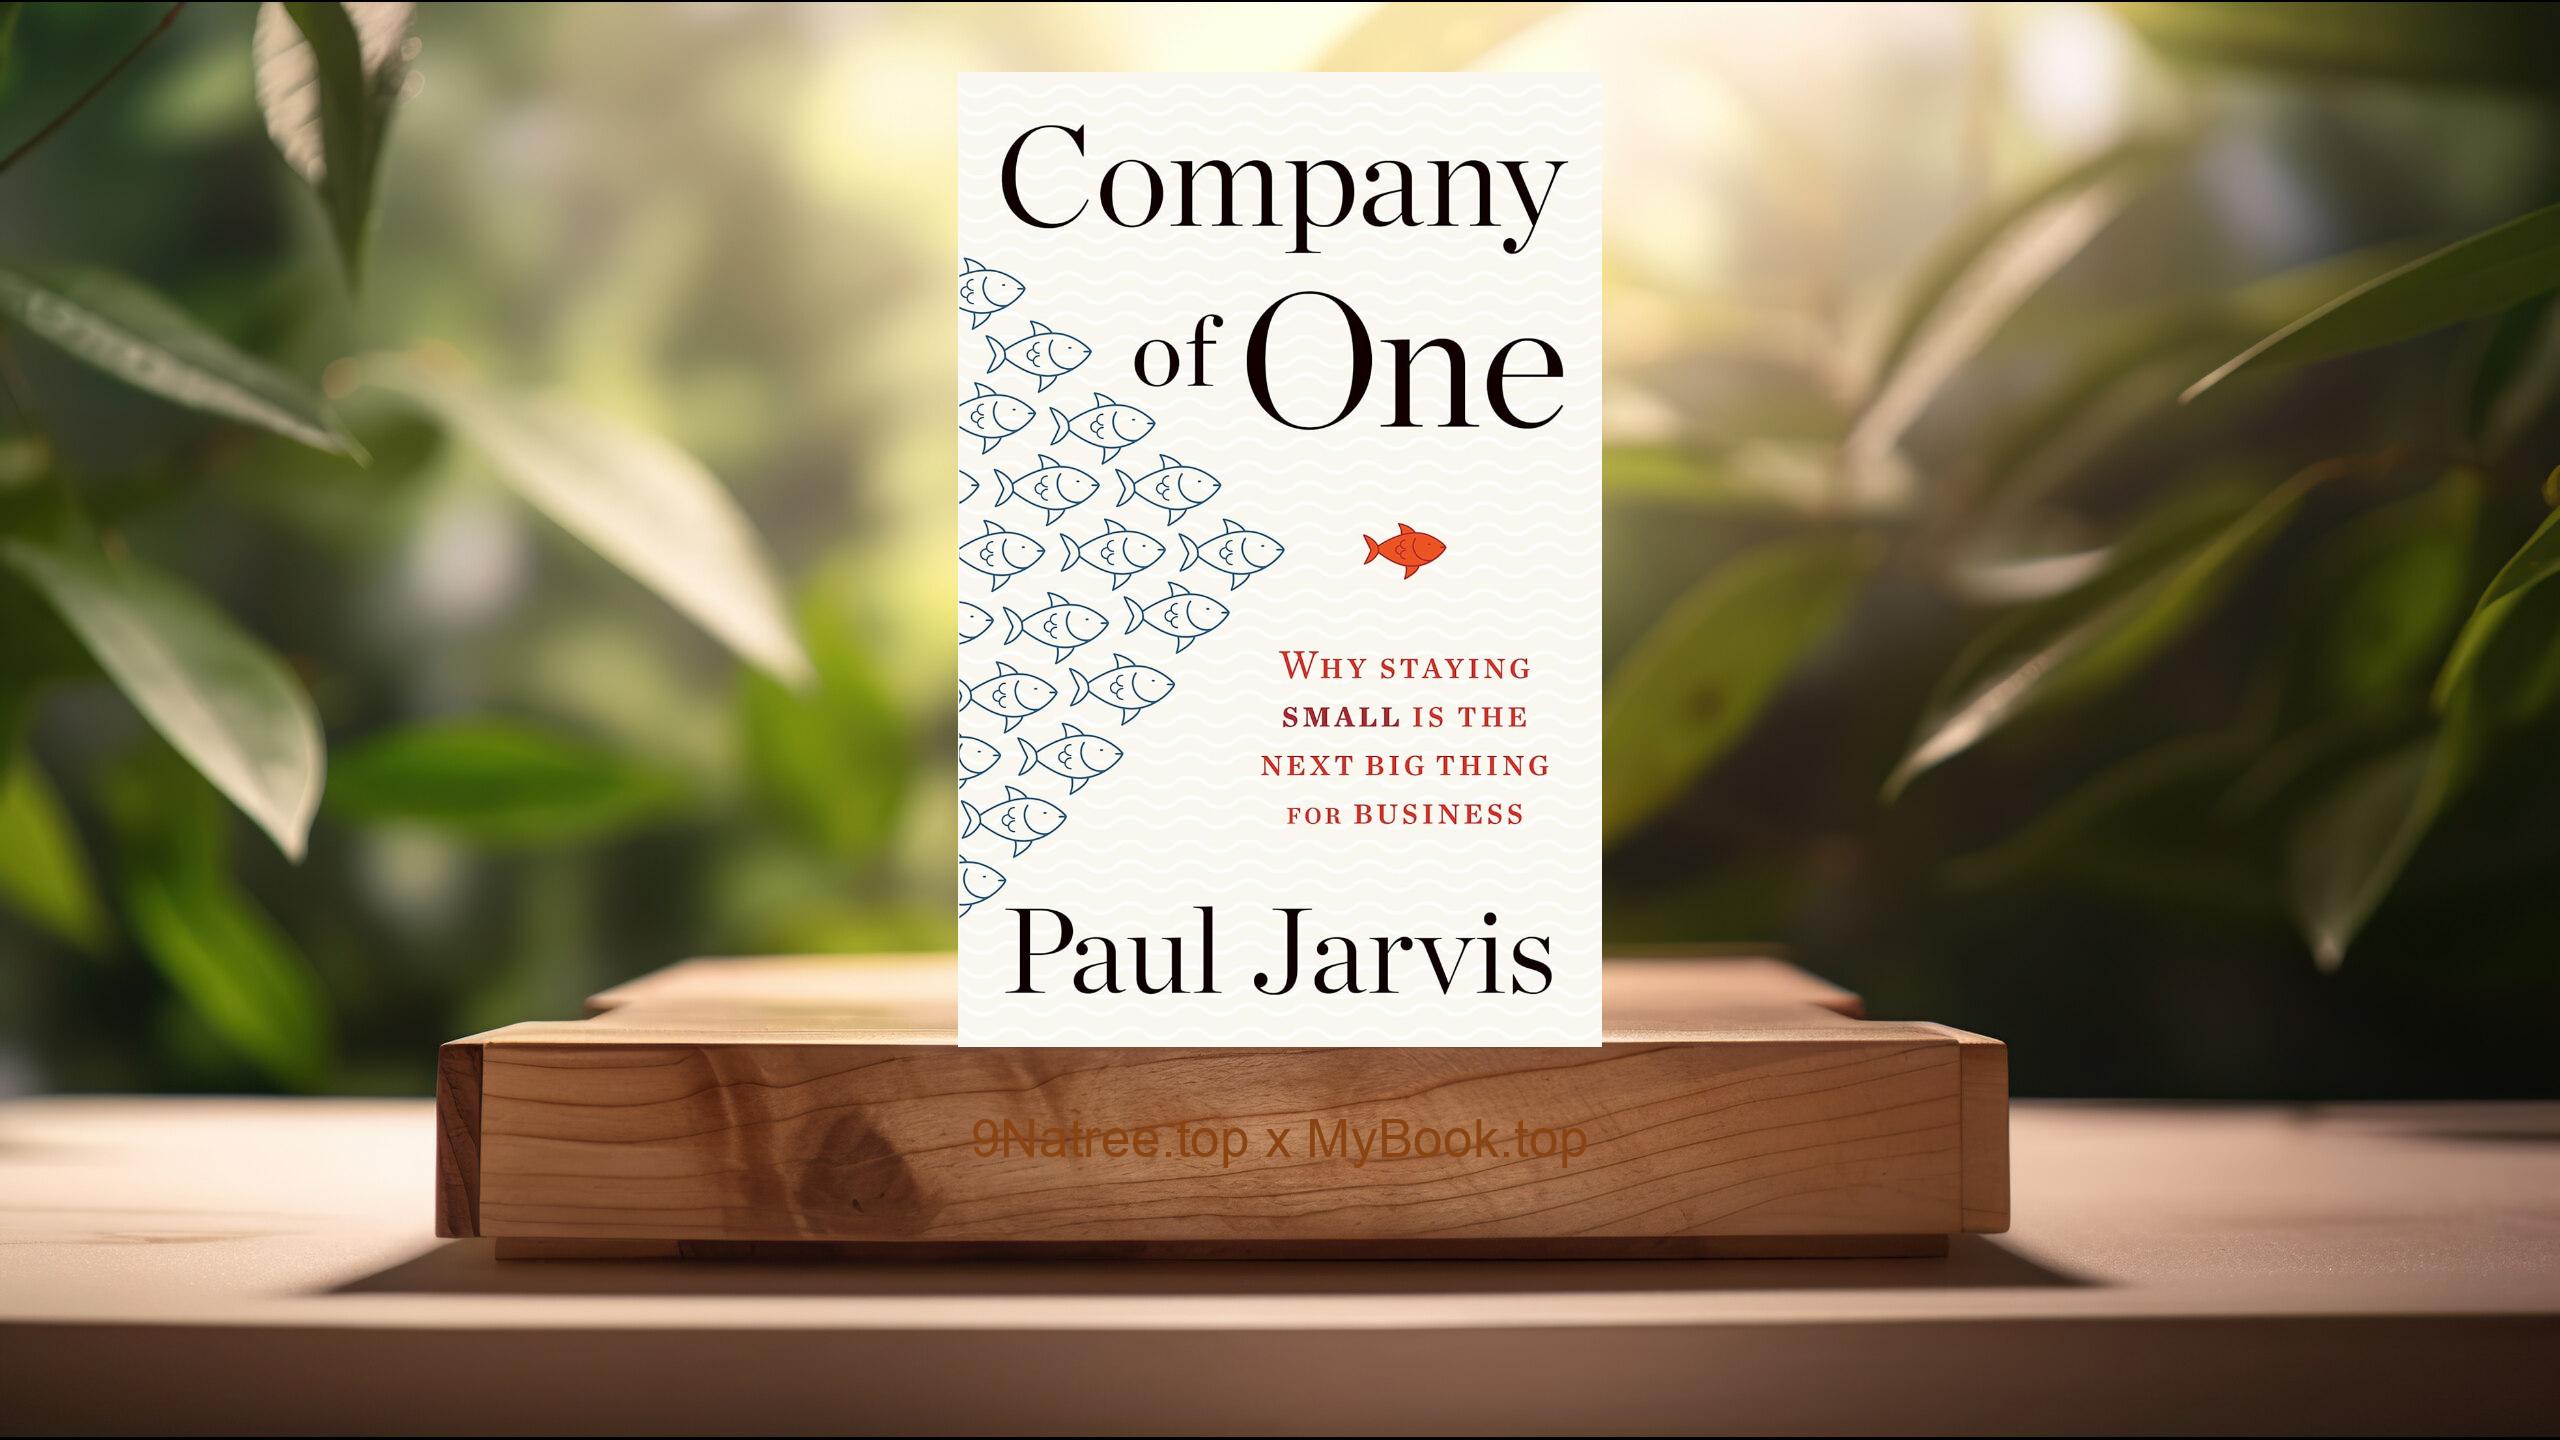 [Review] Company Of One: Why Staying Small Is the Next Big Thing for Business (Paul Jarvis) Summarized